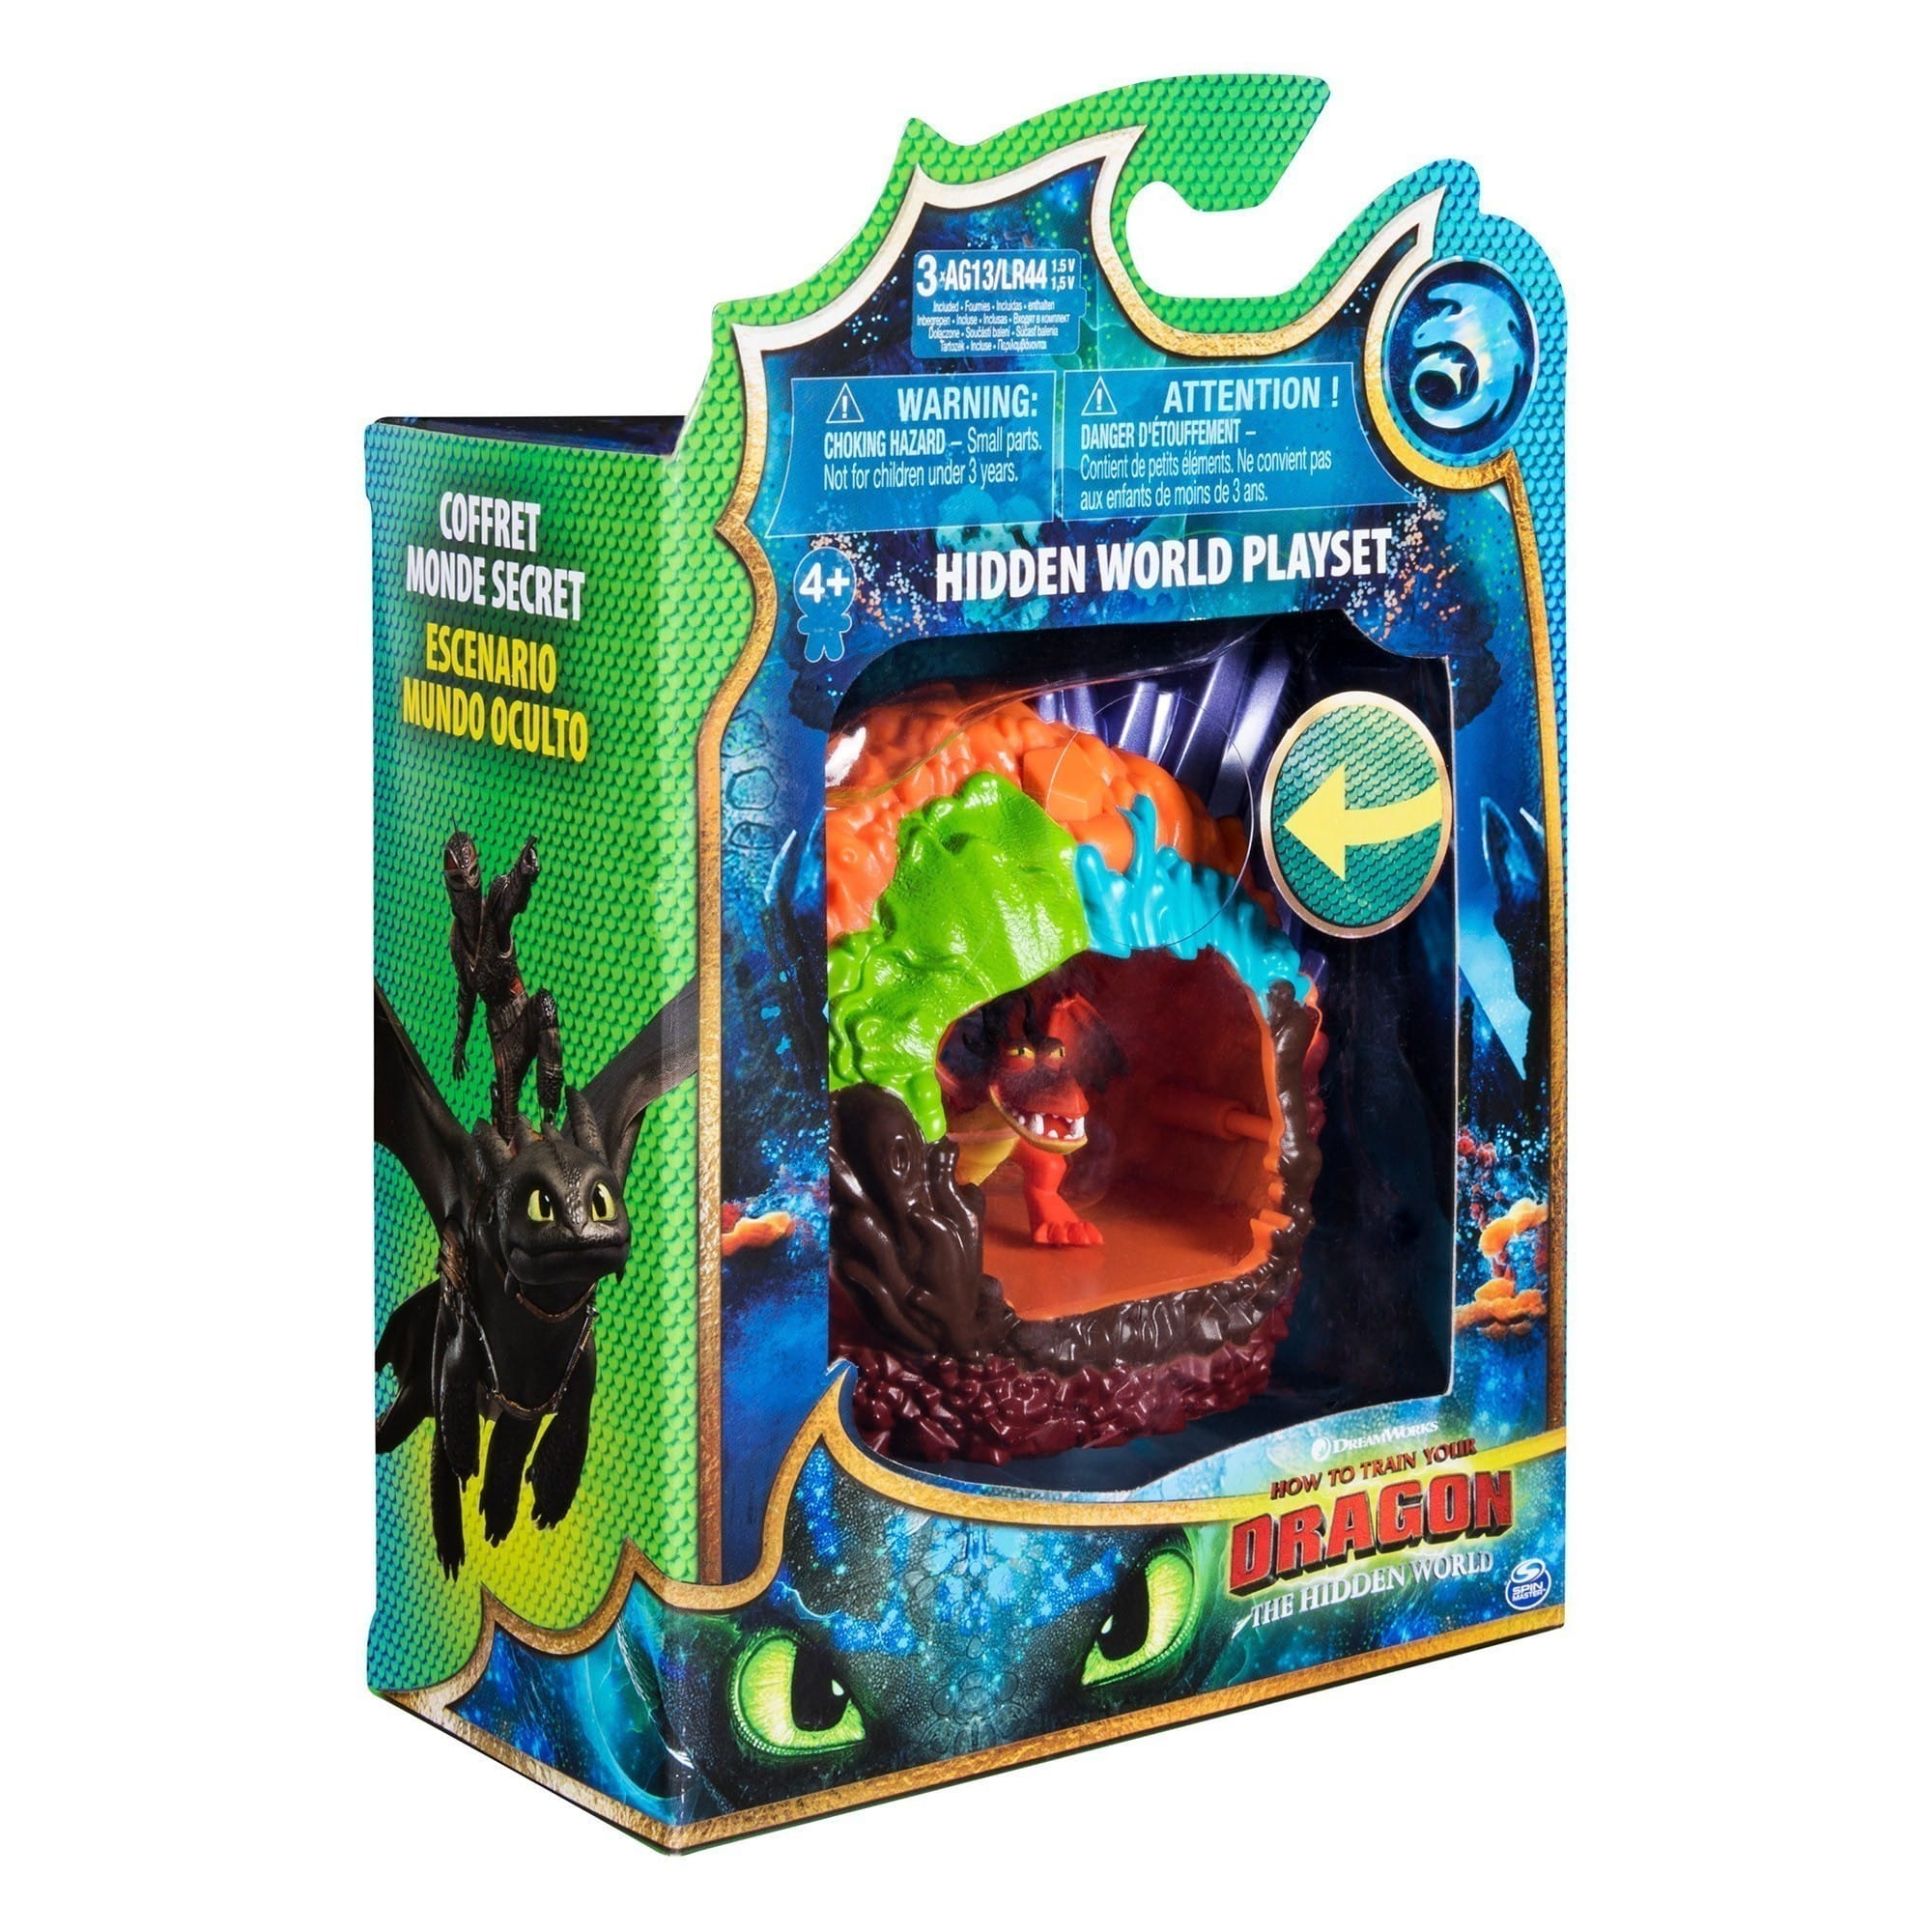 Dreamworks - How To Train Your Dragon 3 - Dragon Lair Playset - Hookfang